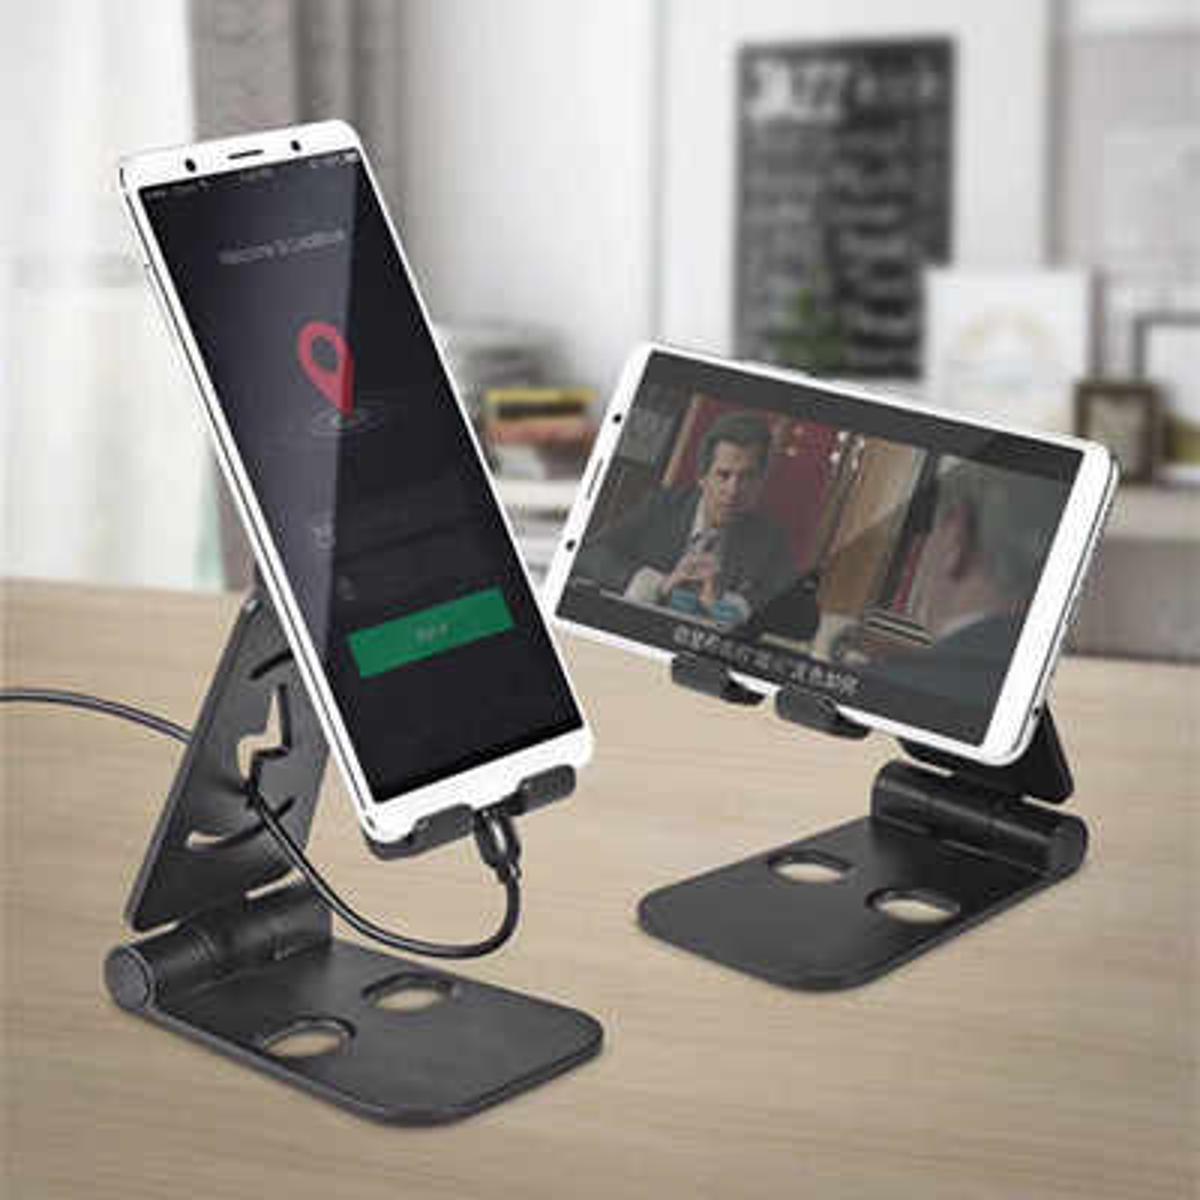 Phone Stands | Best on Amazon - Blink.sa.com